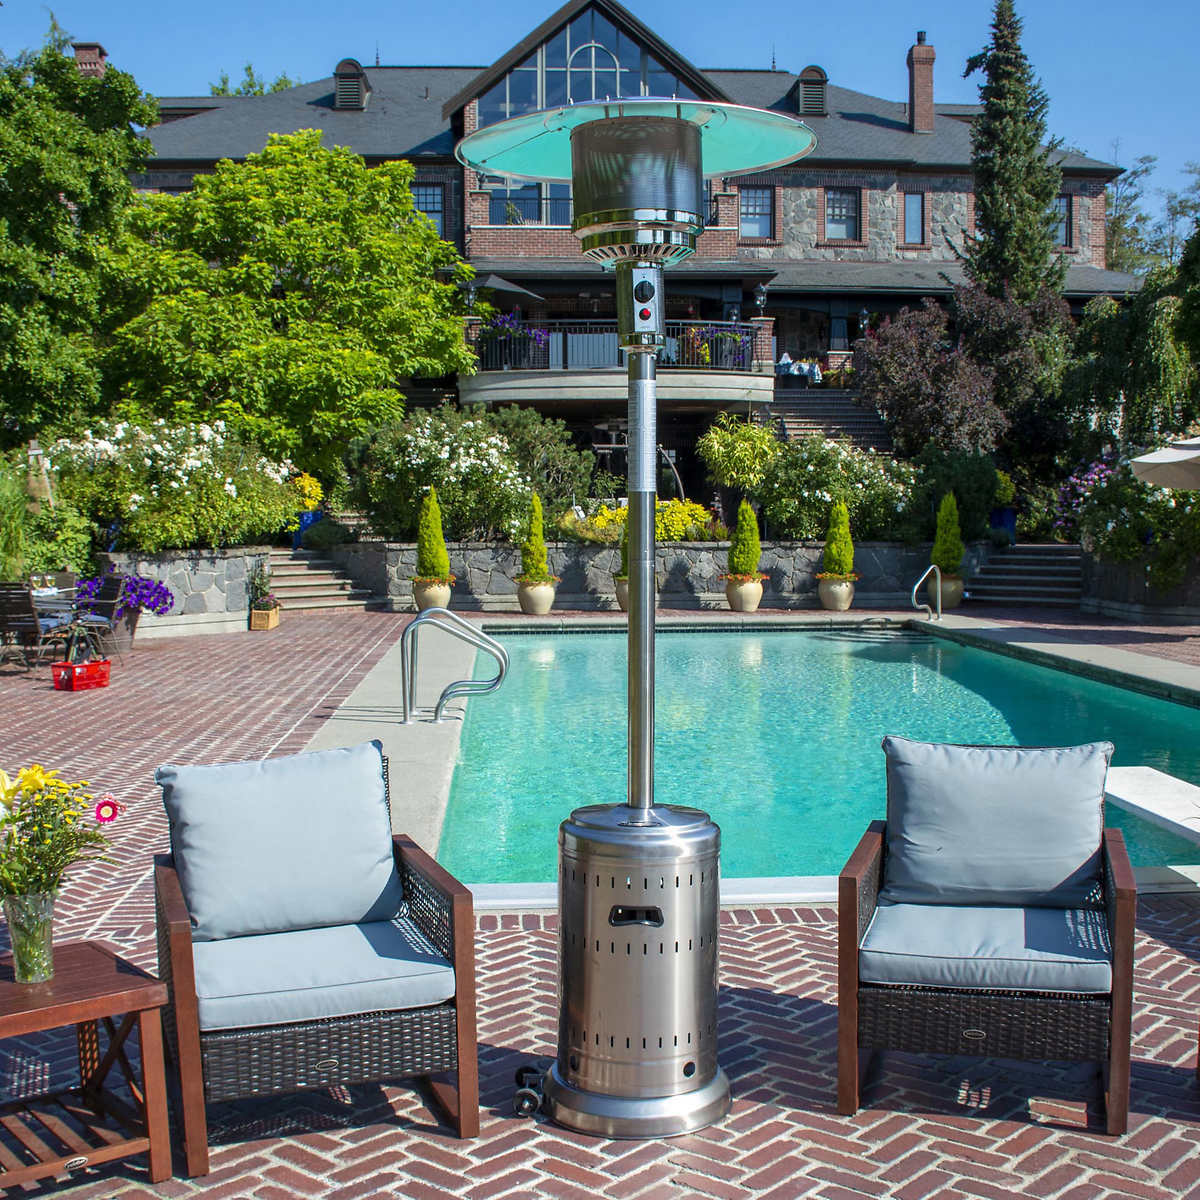 Paramount Stainless Steel Patio Heater, Outdoor Heating Lamps Costco